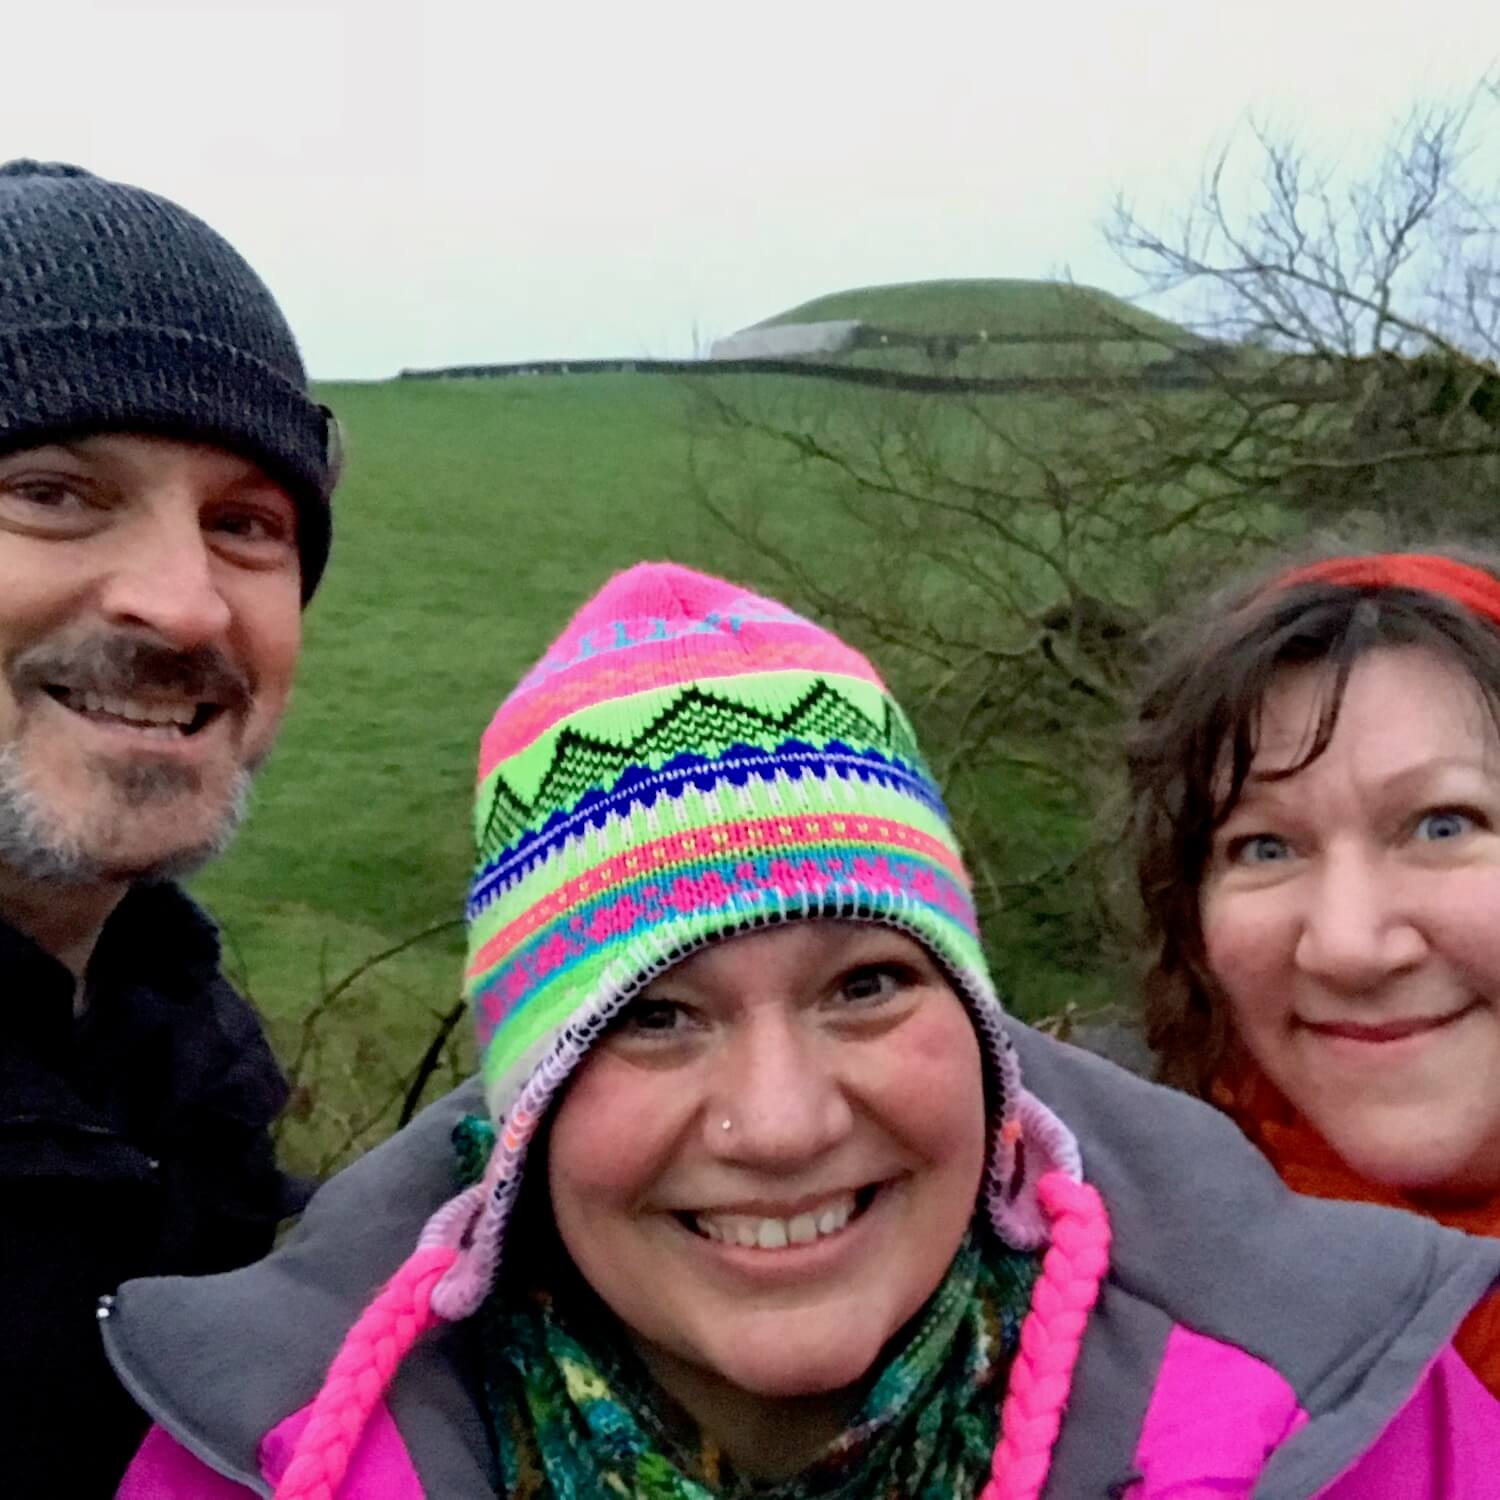 My new friends and I pose for a selfie with Newgrange mound off in the distance.